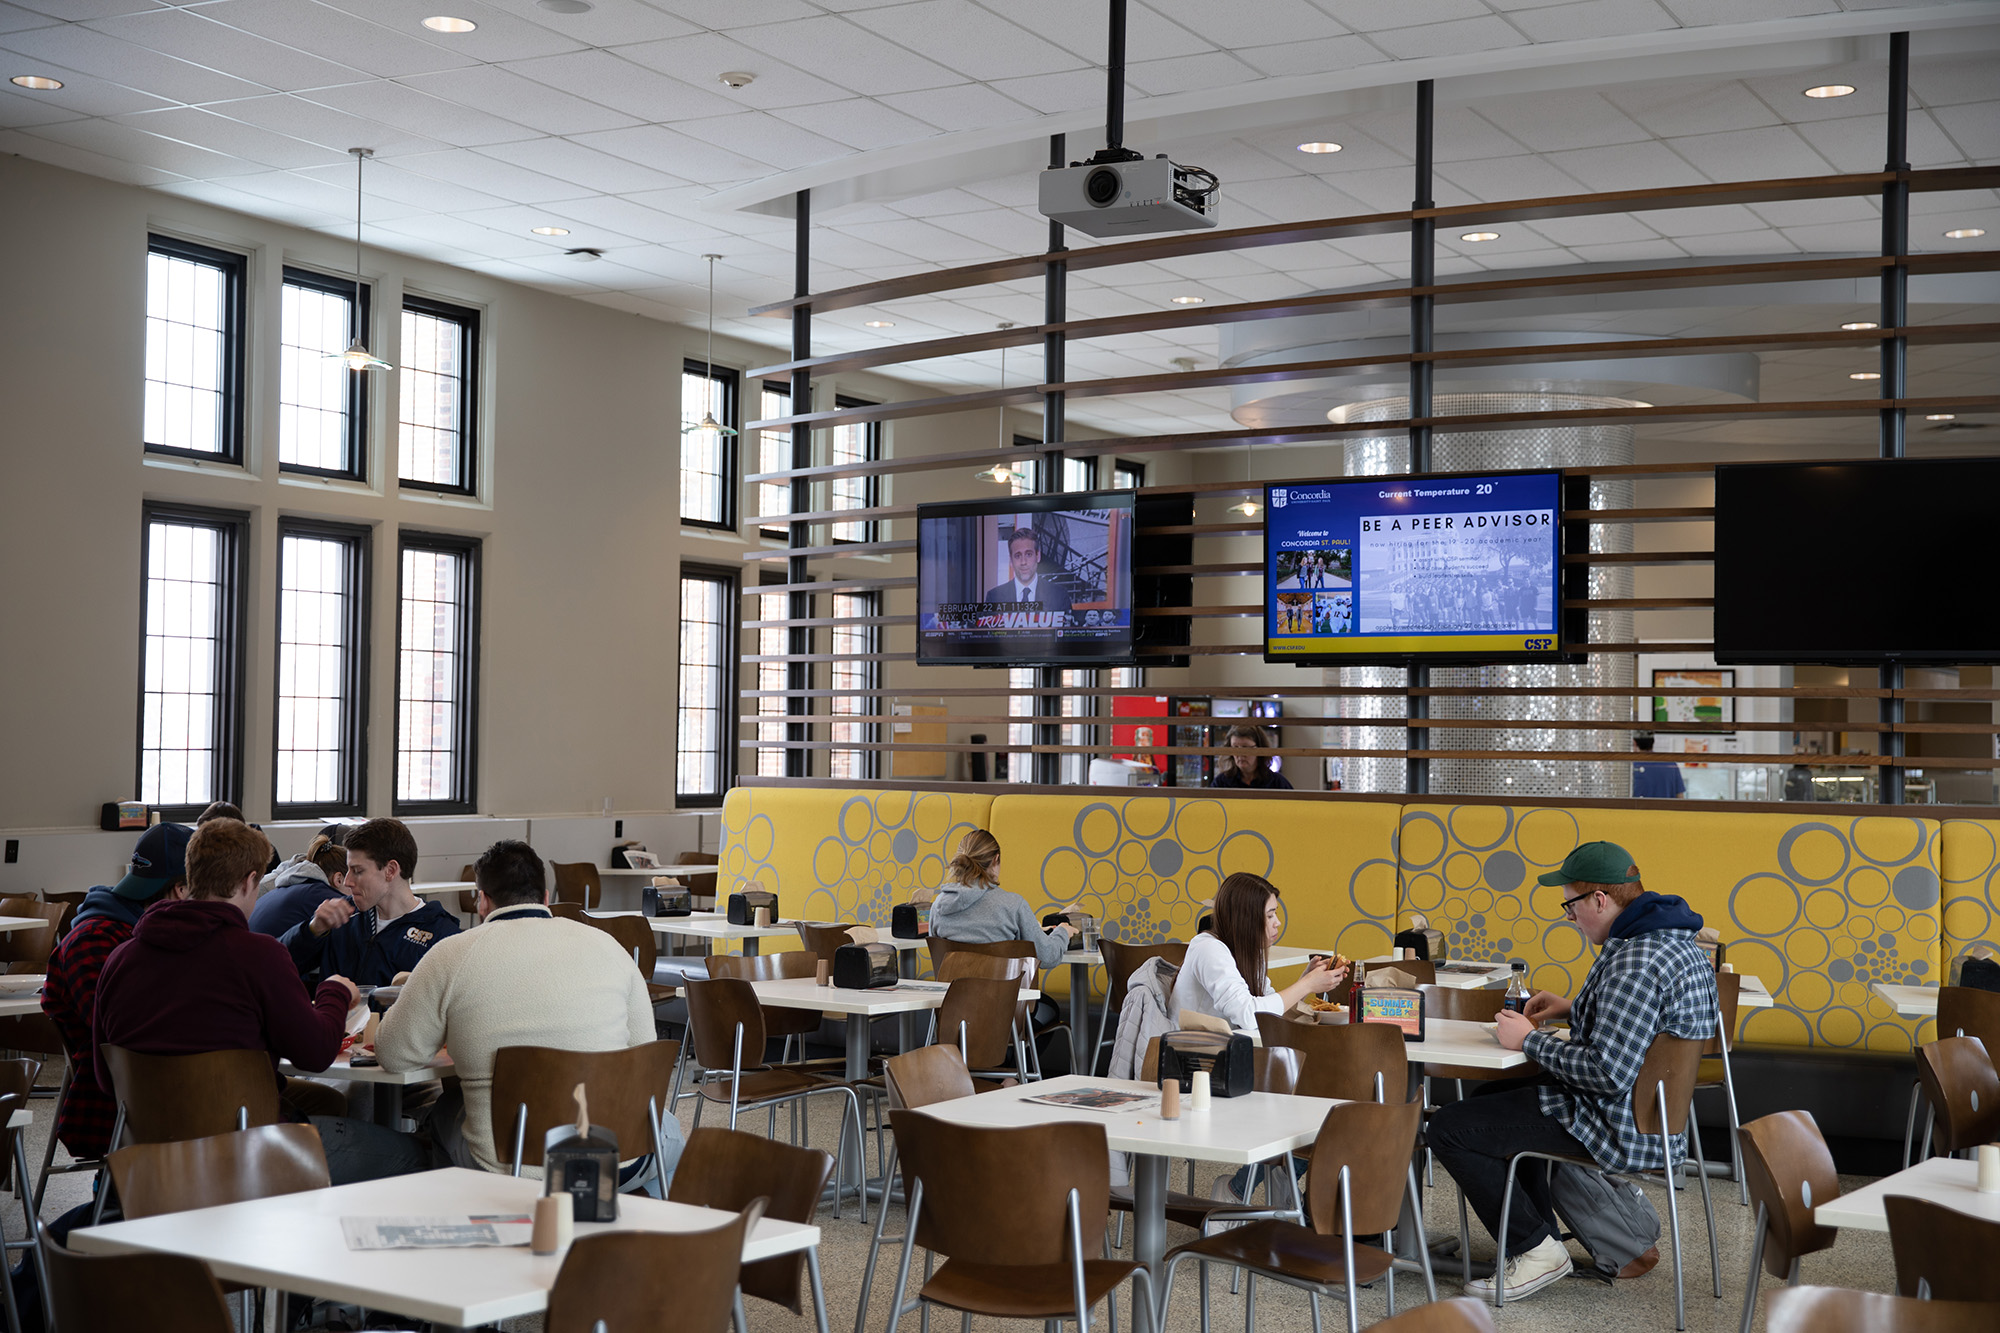 Campus dining hall with students eating at tables.